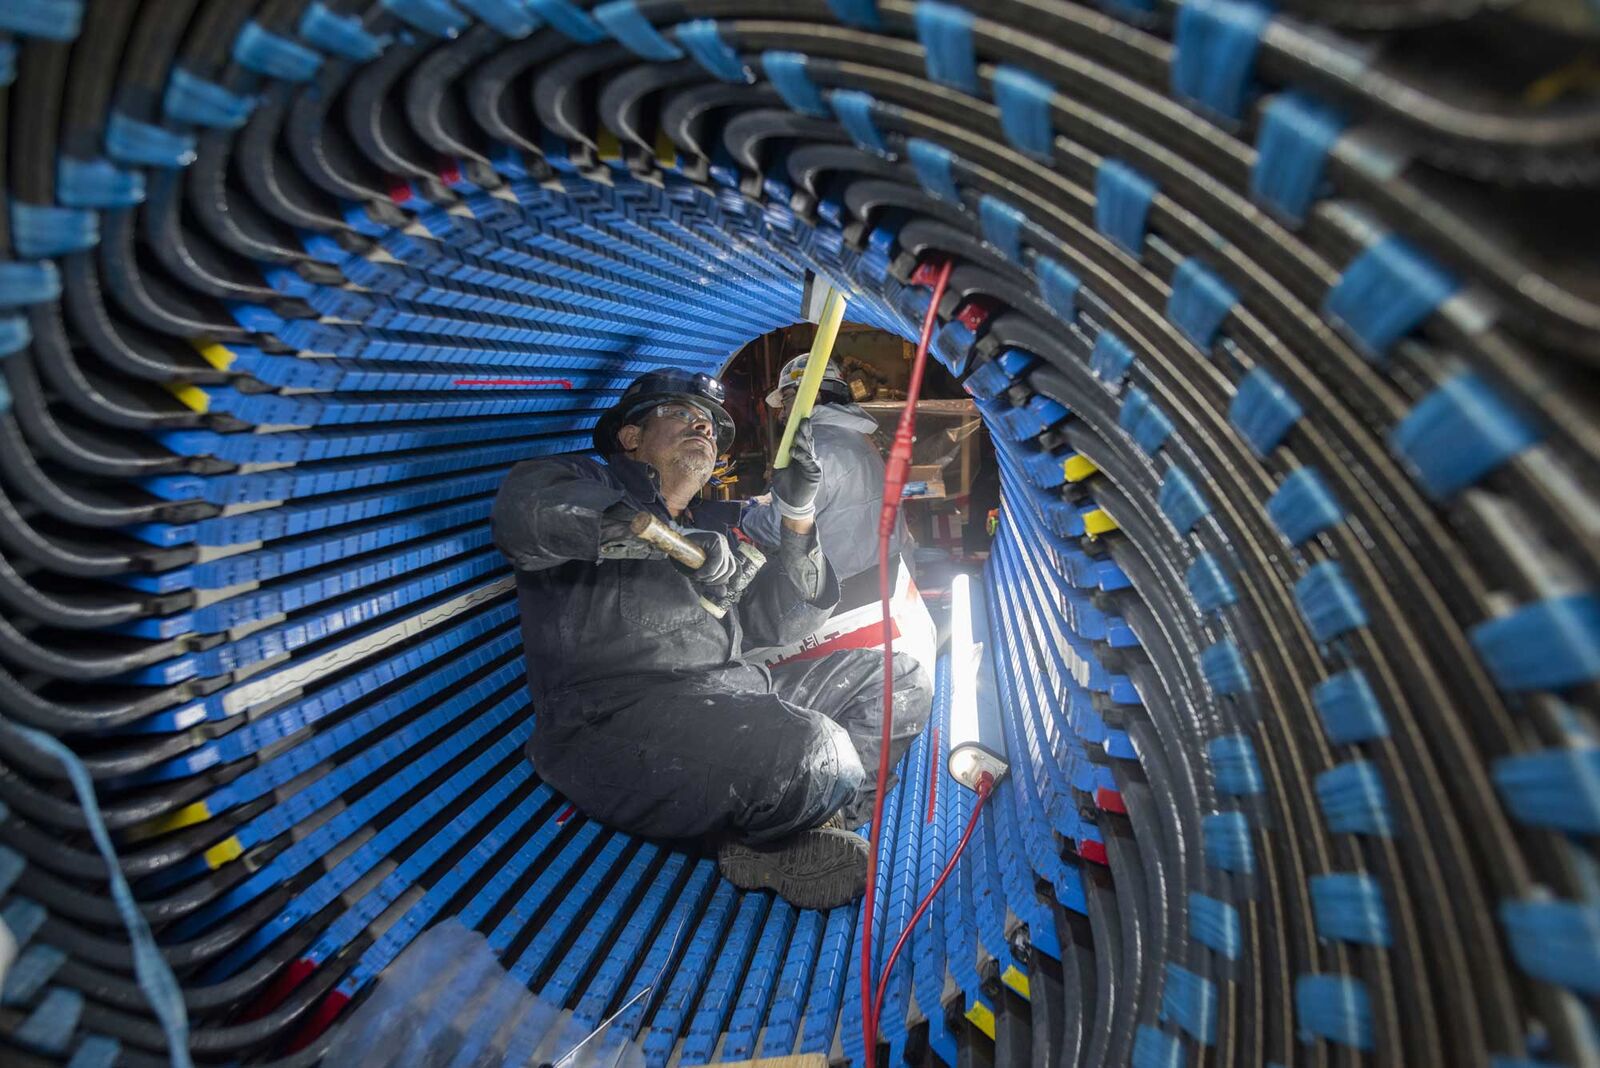 A contractor working to rewind a stator, inside a turbine that generates electricity for the Kuparuk oil field on the North Slope of Alaska.